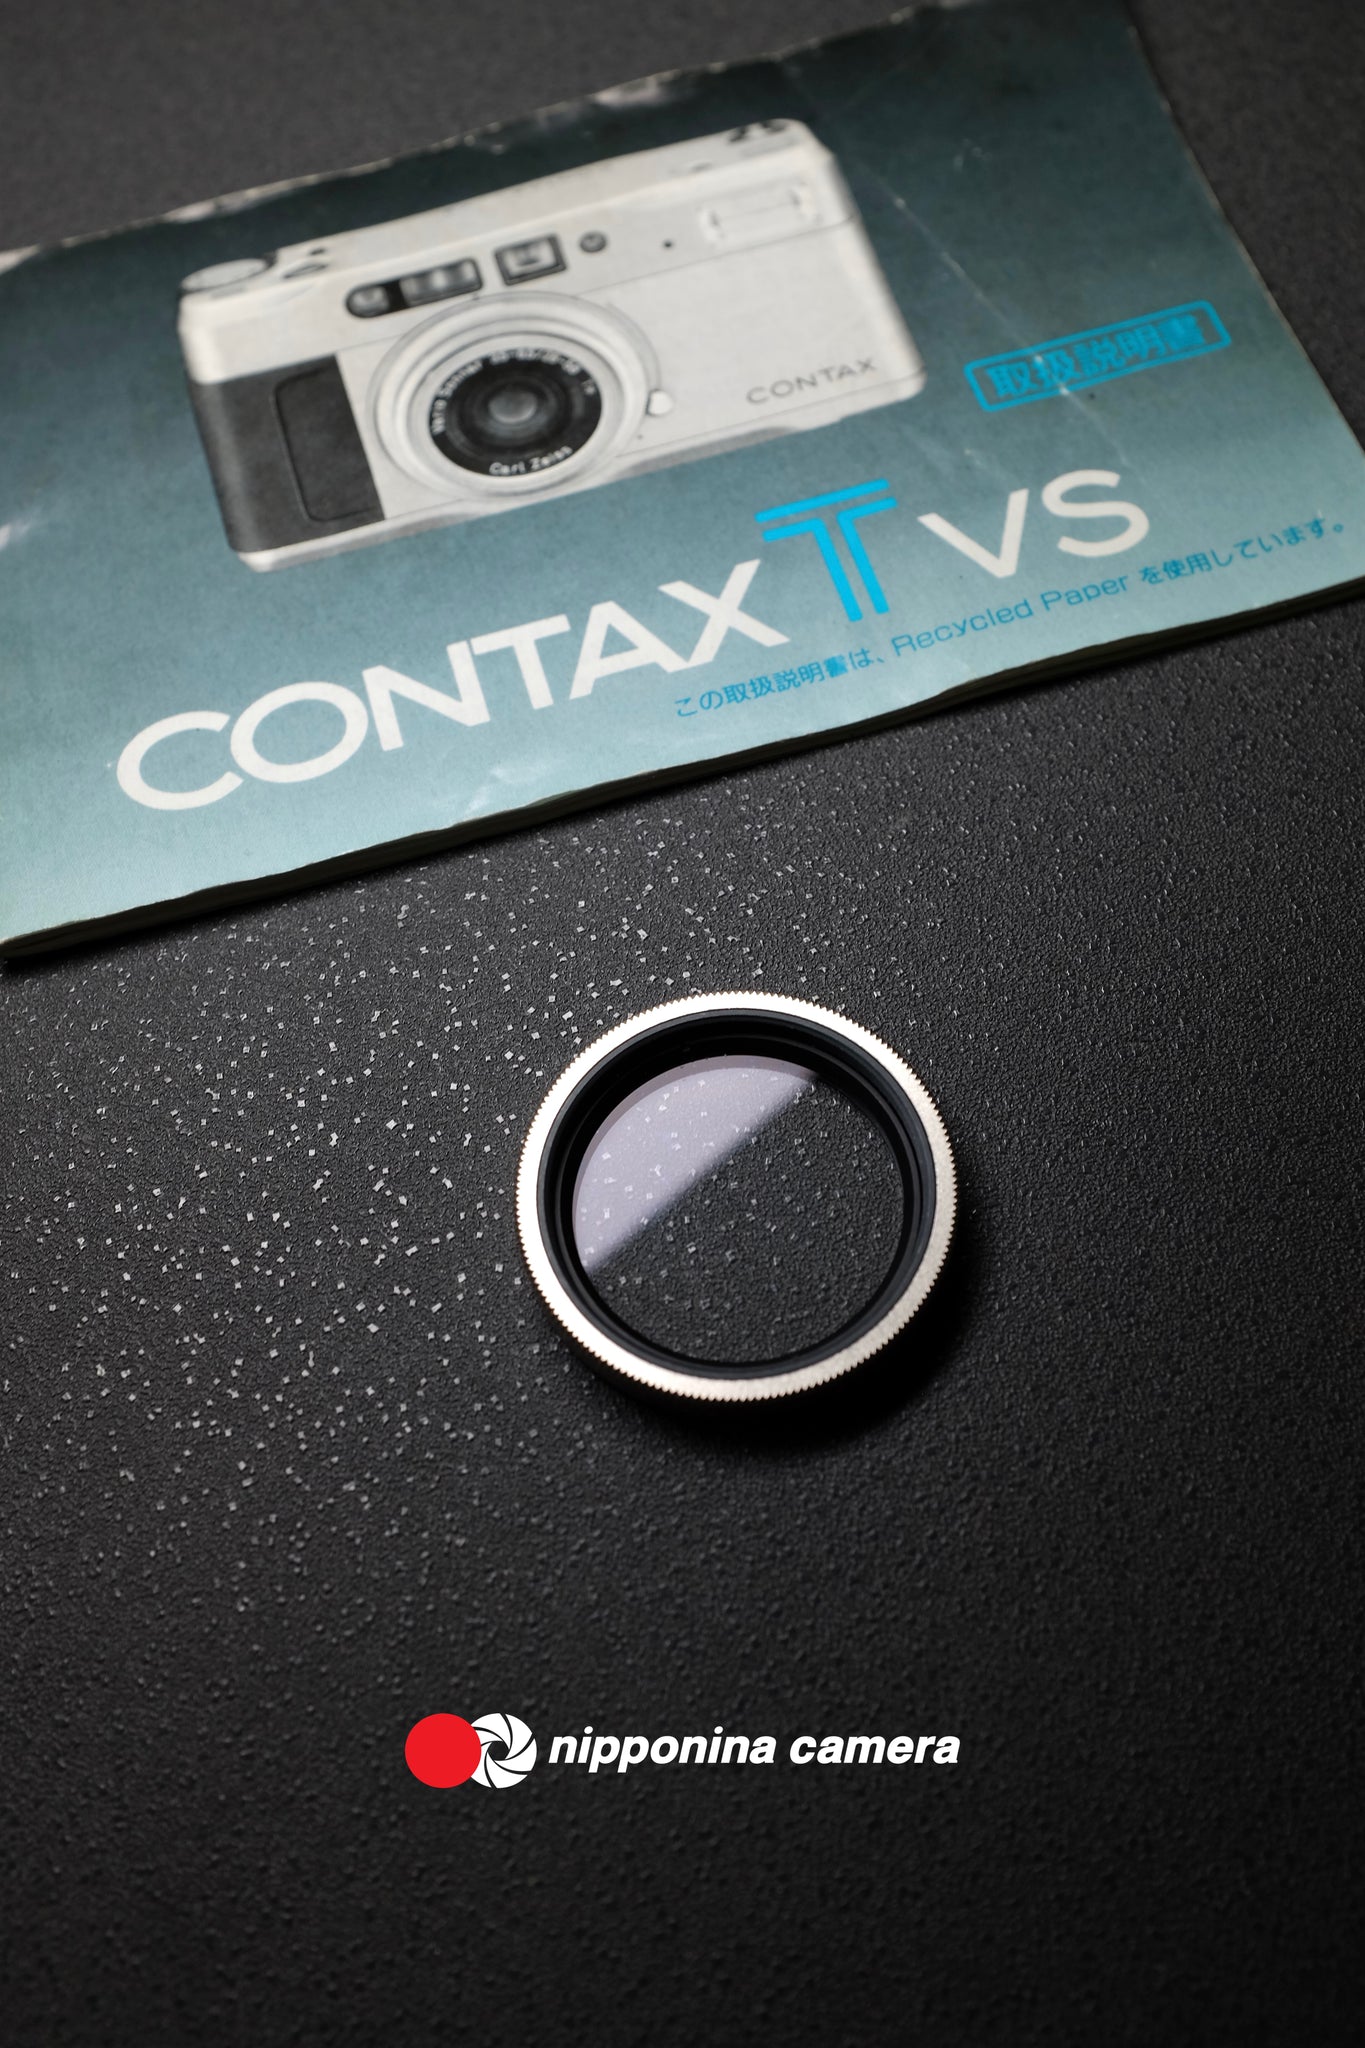 Contax TVS P-Filter for Lens